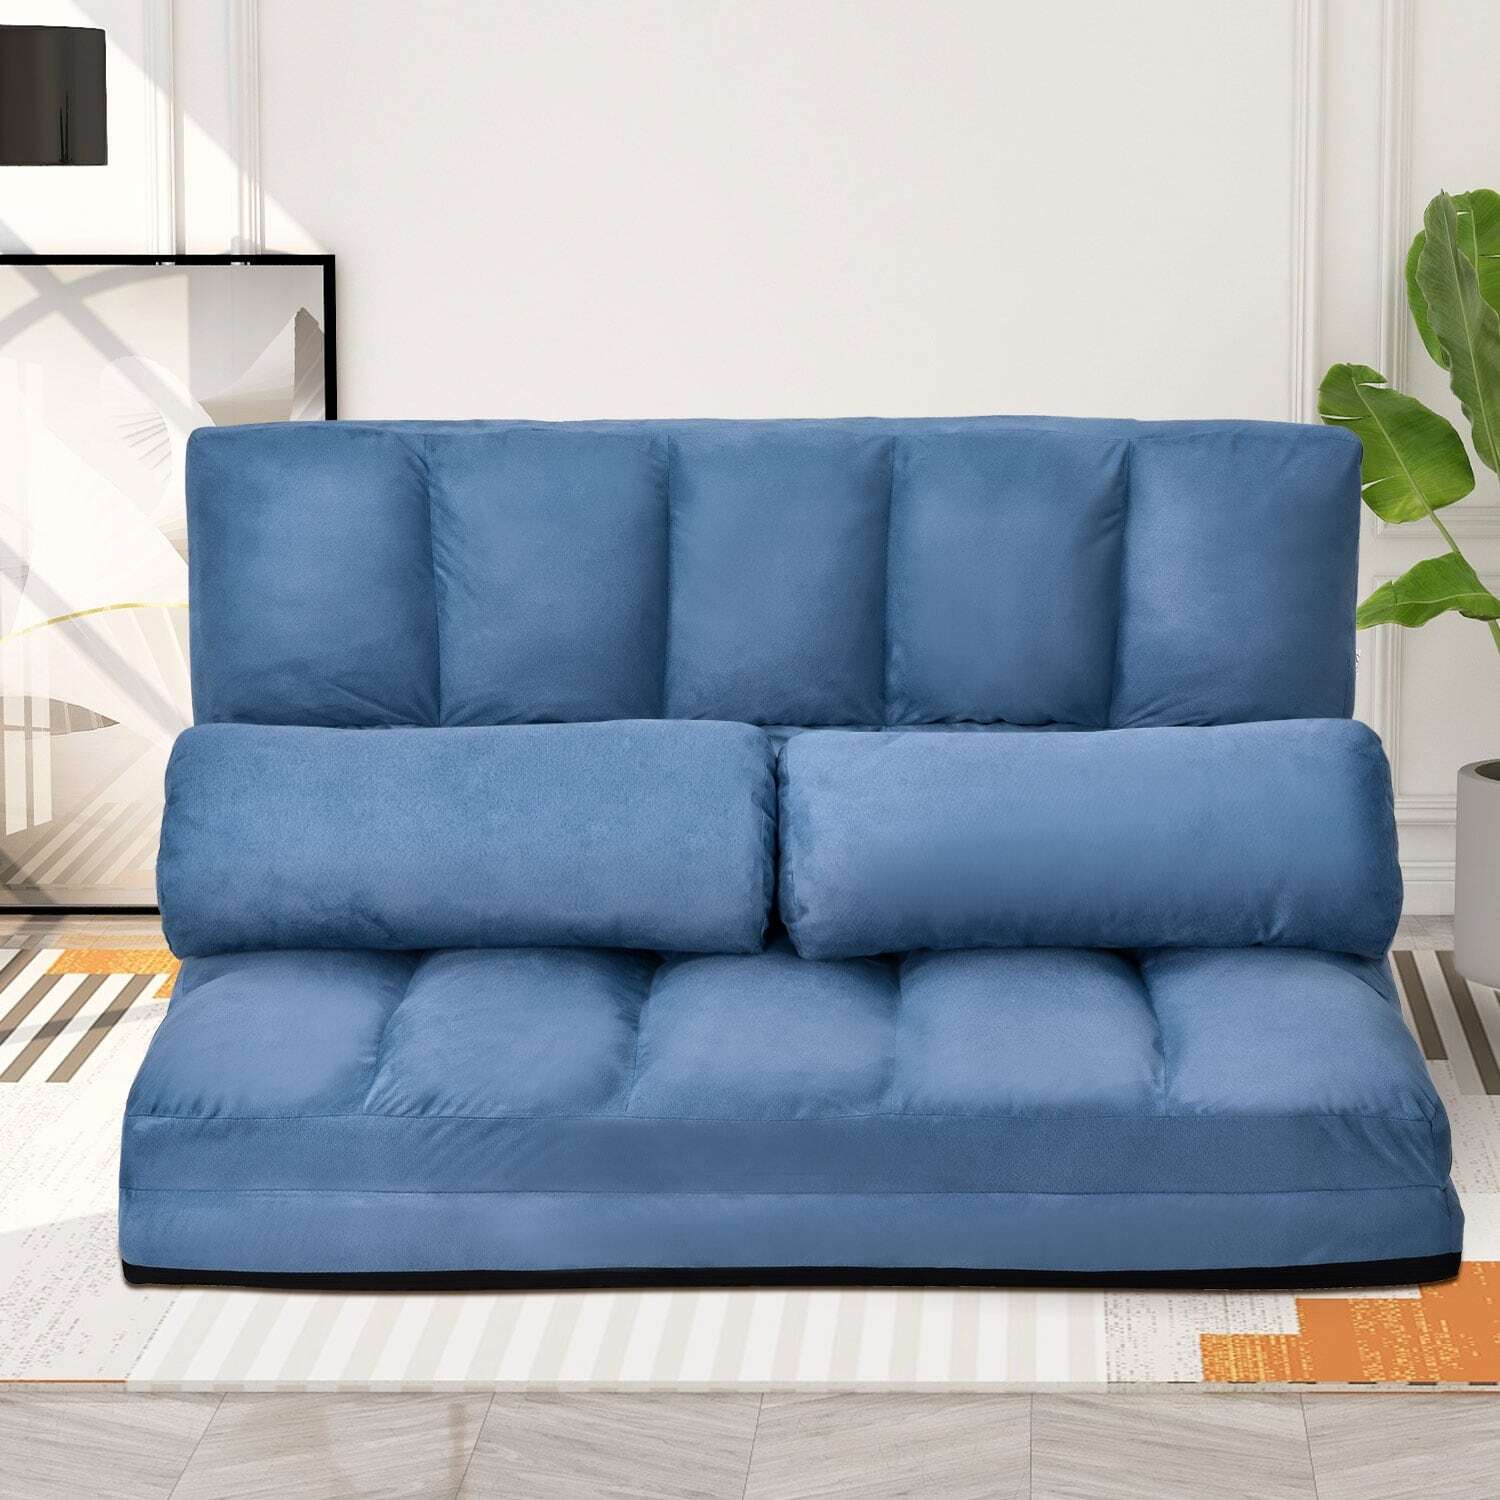 Ergonomic Floor Couch with Back Support